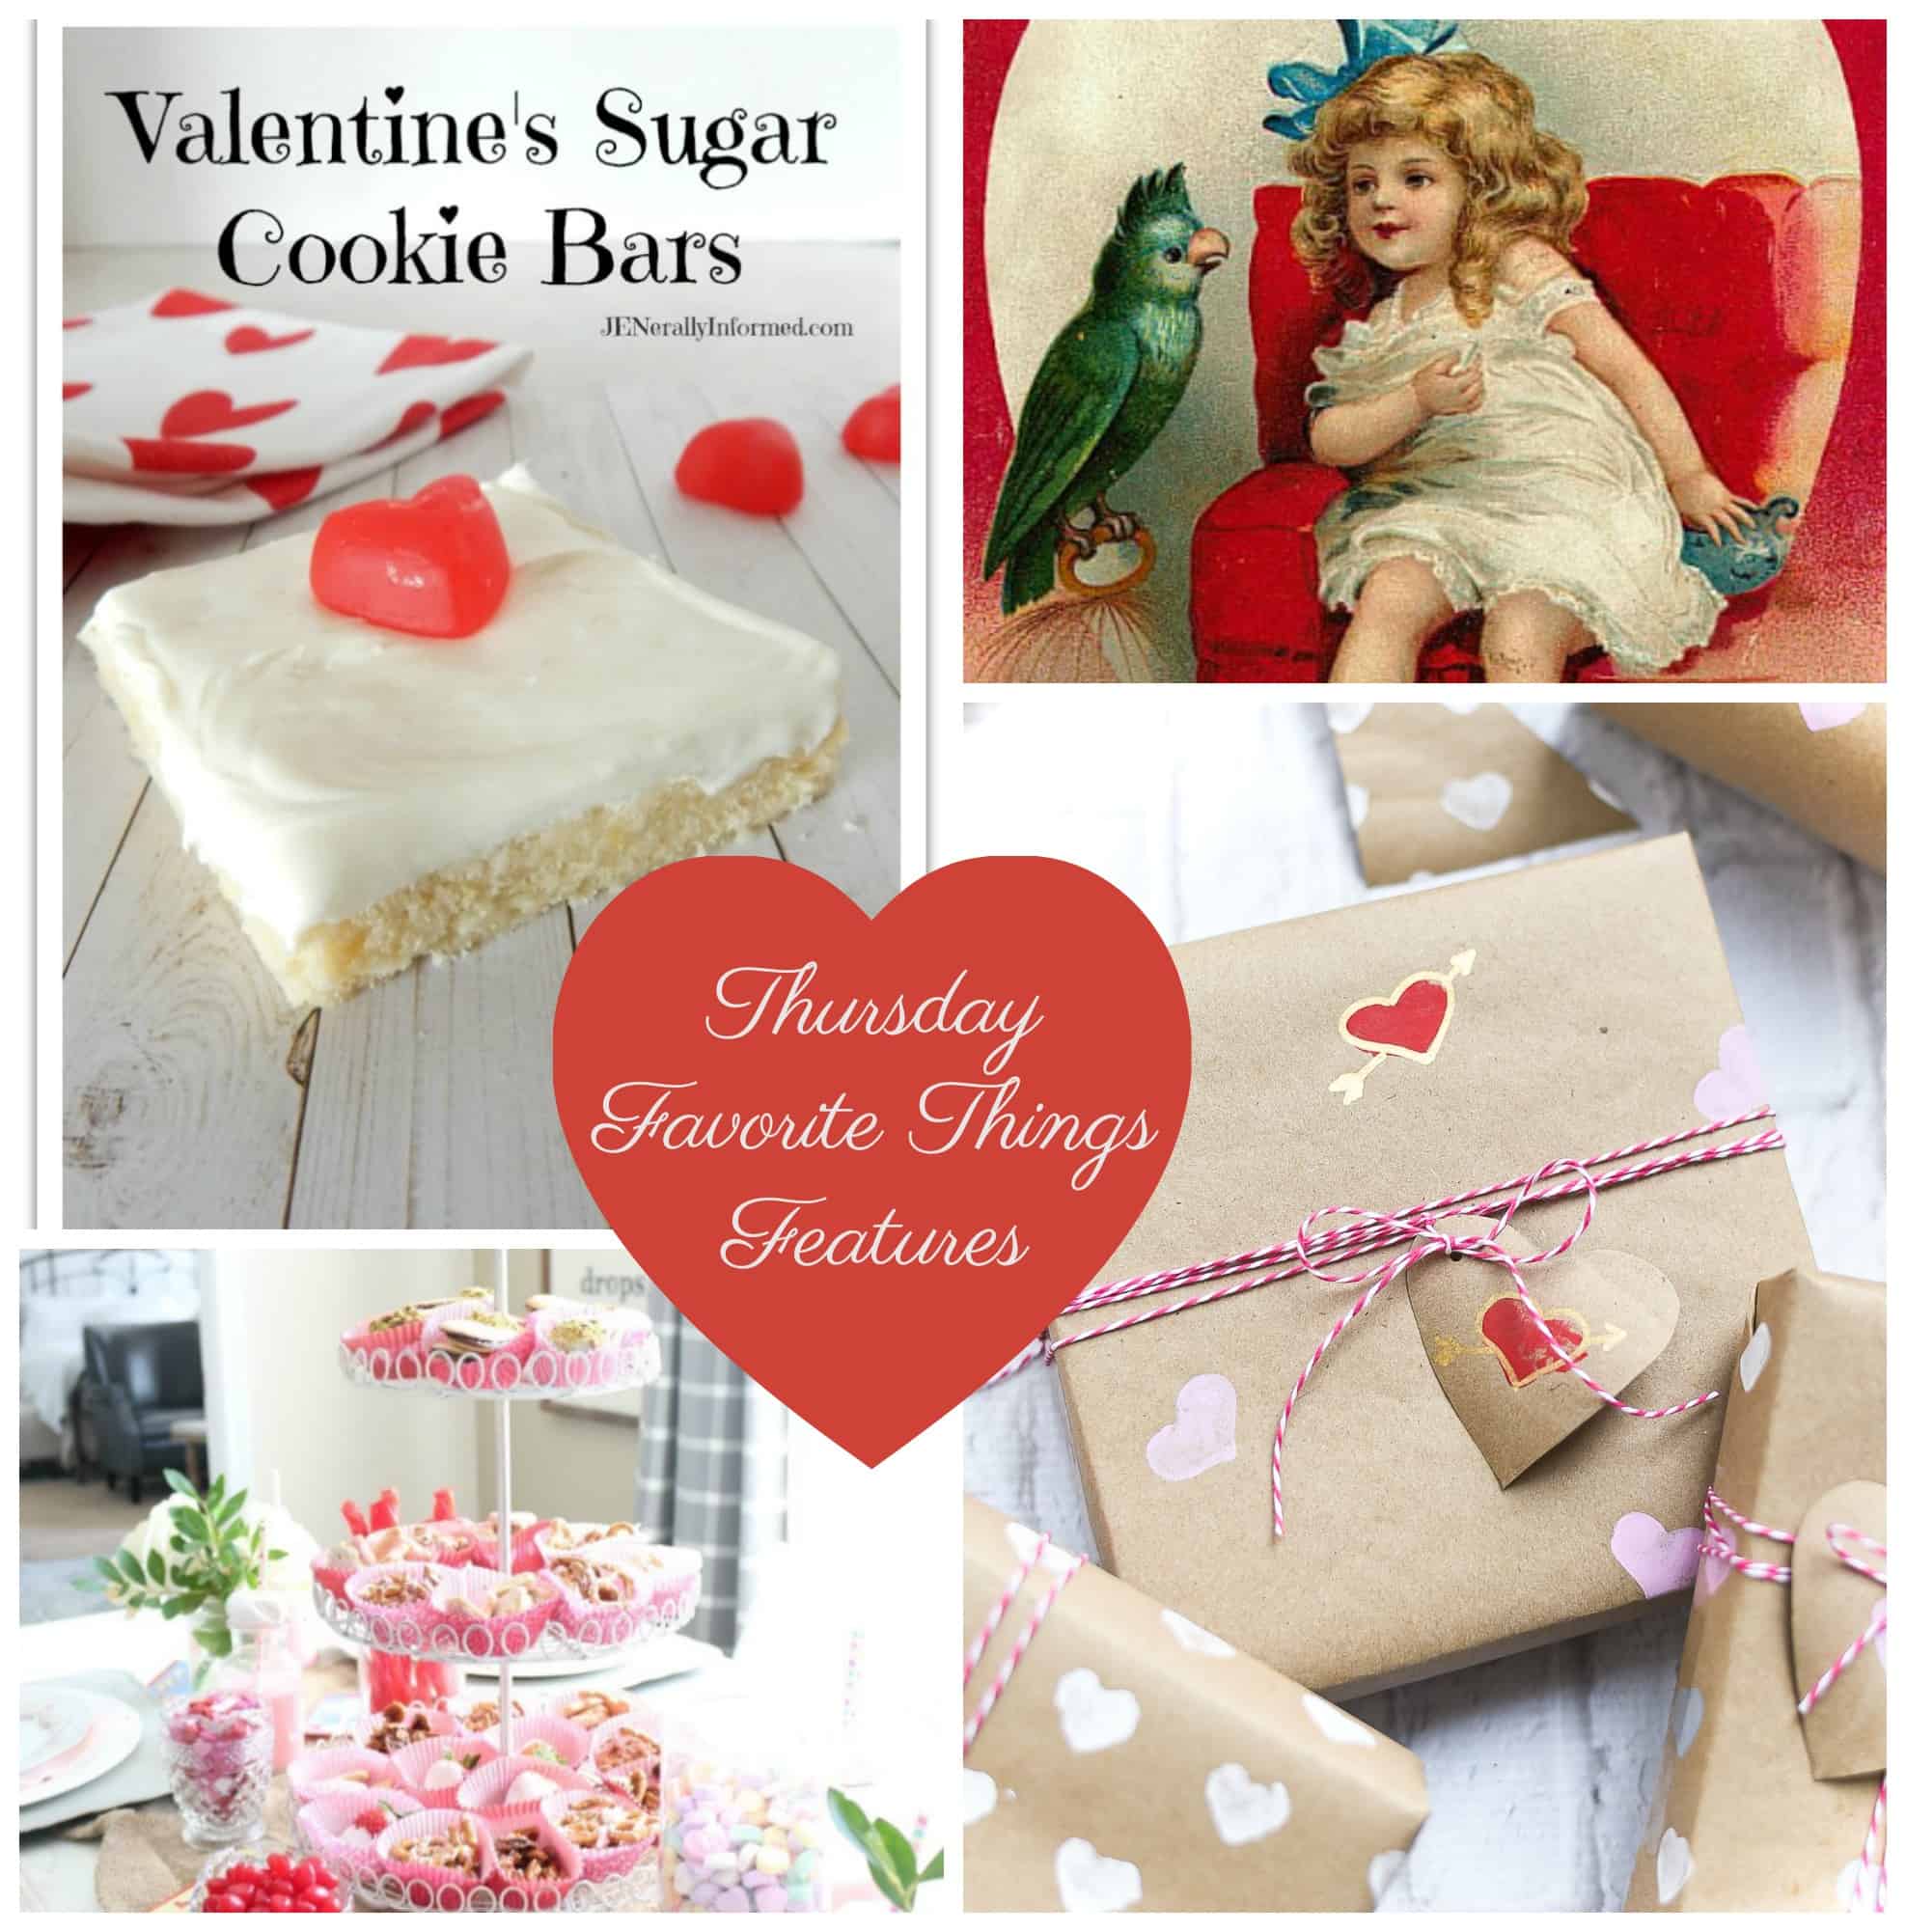 More Valentine’s Day Fun and TFT #426